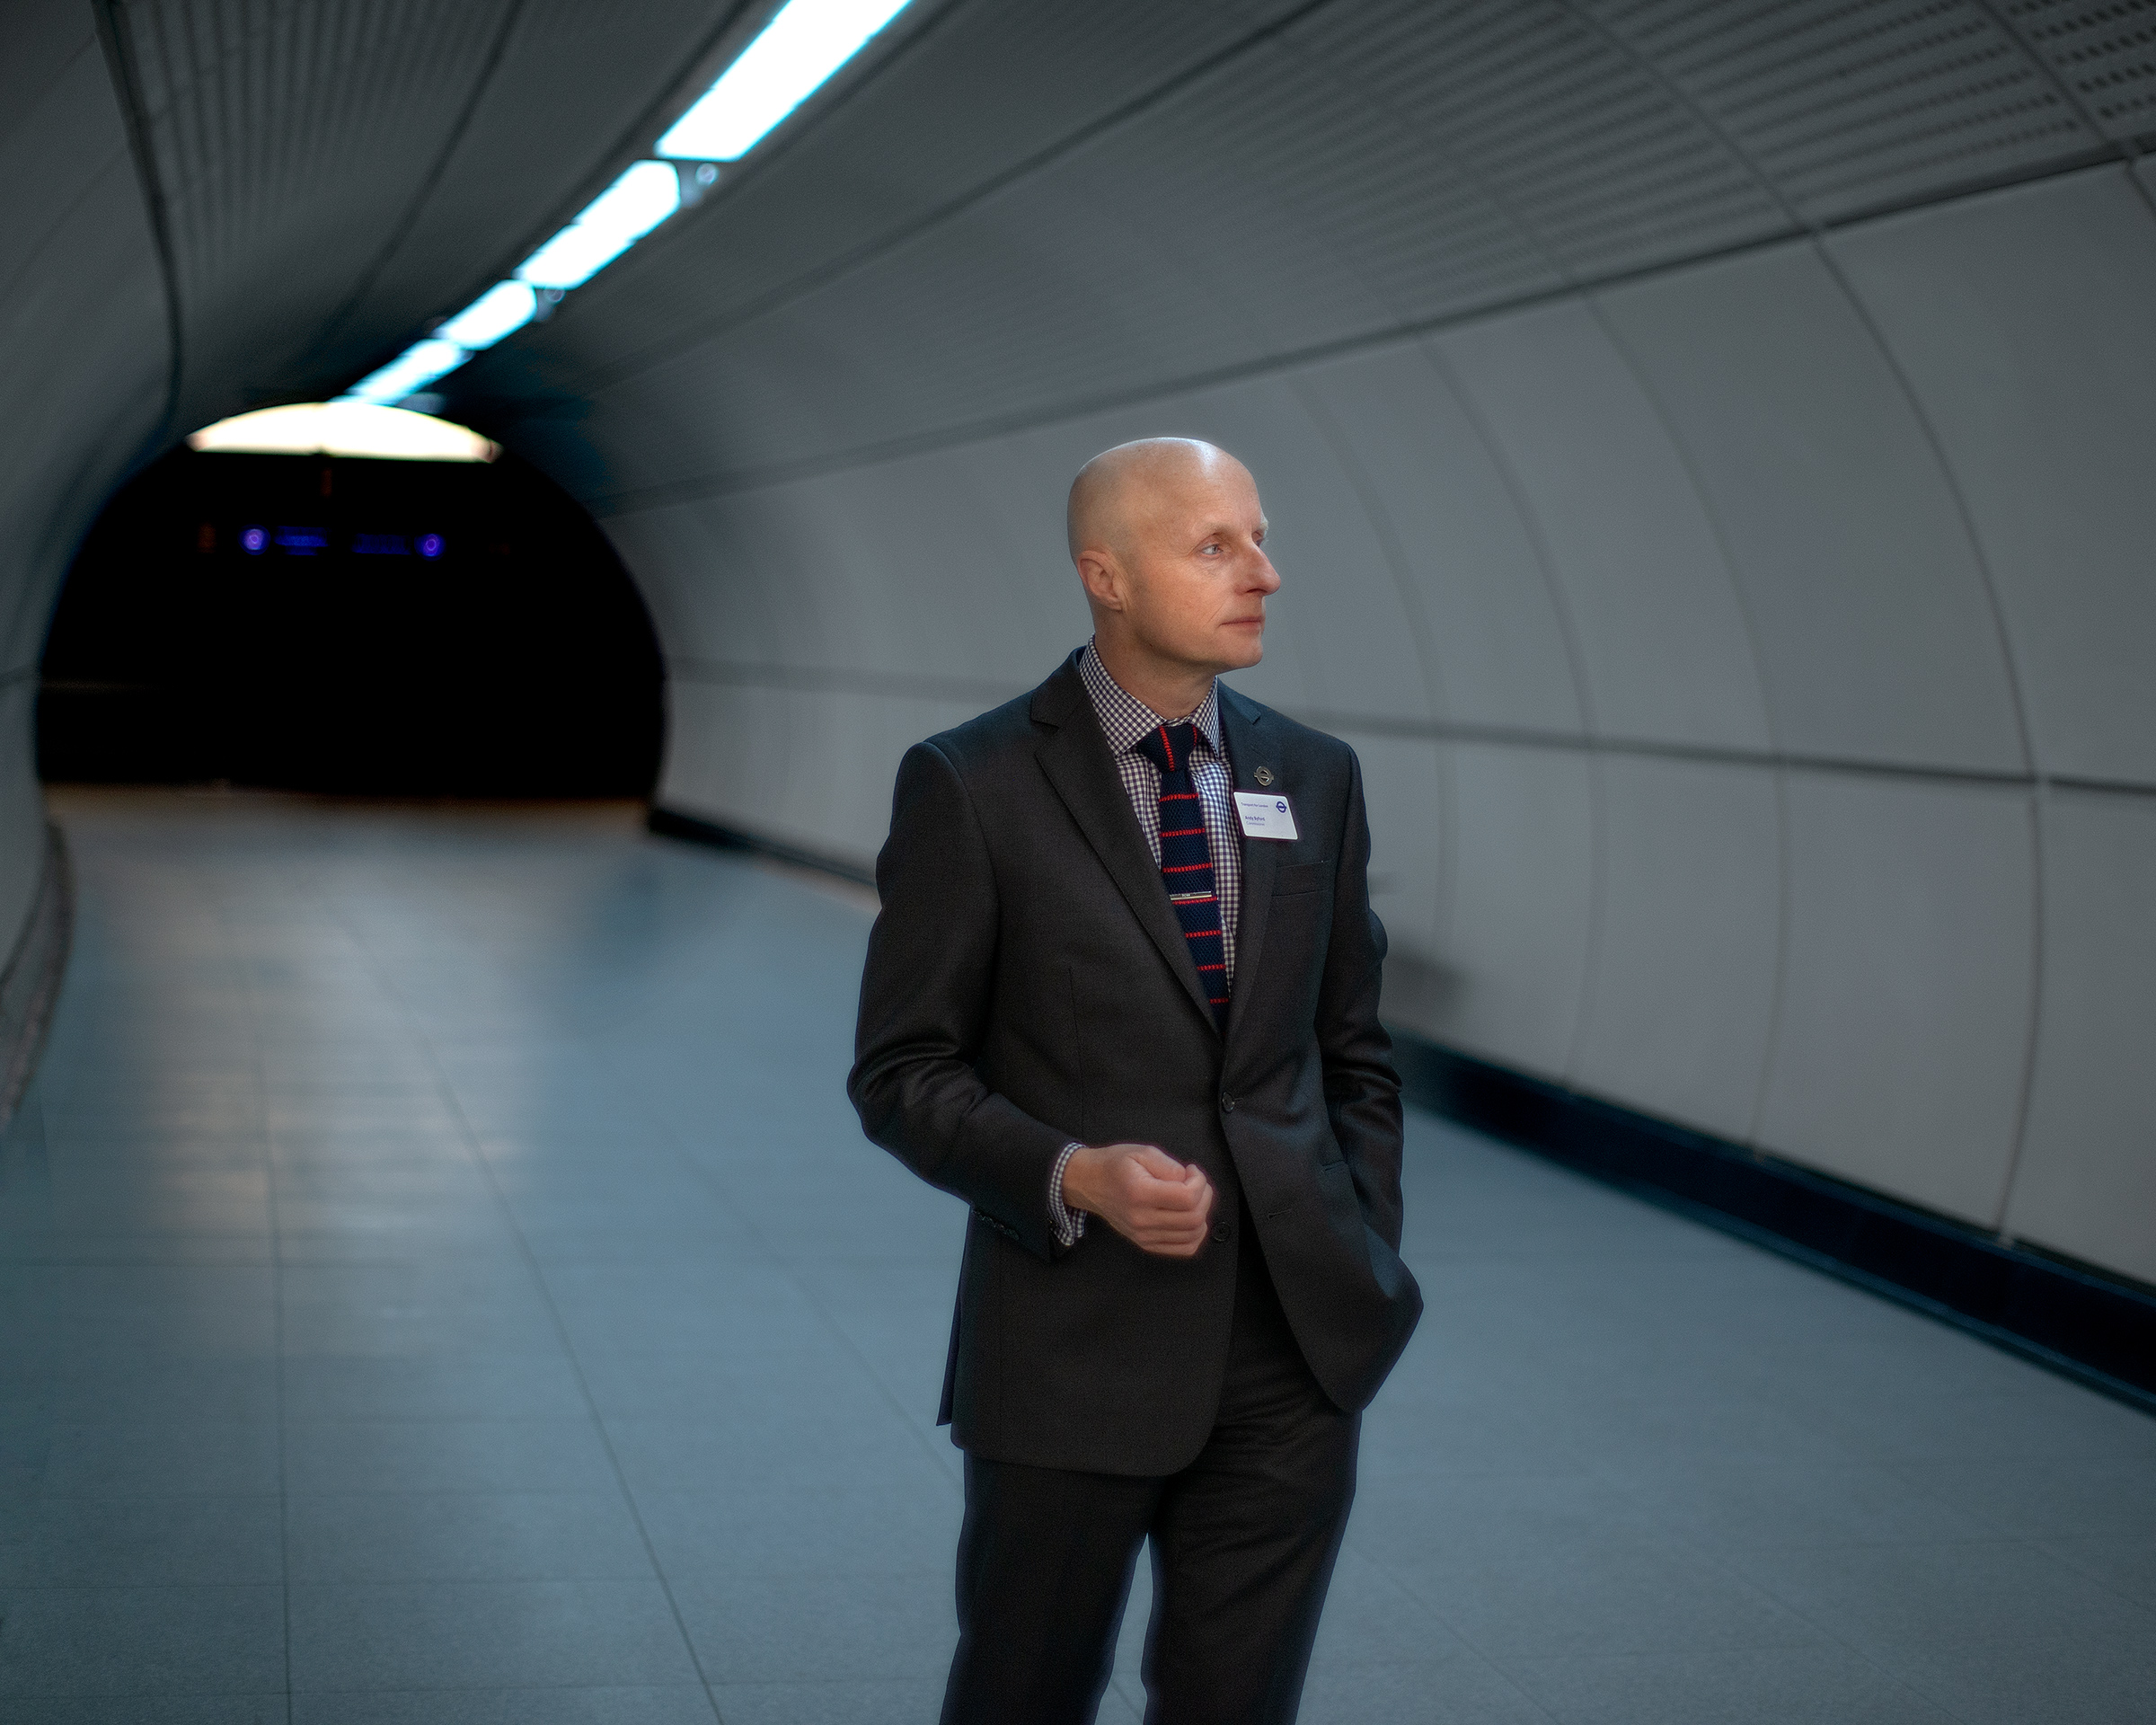 Byford’s first job was as a station foreman for Transport for London; now he’s the commissioner